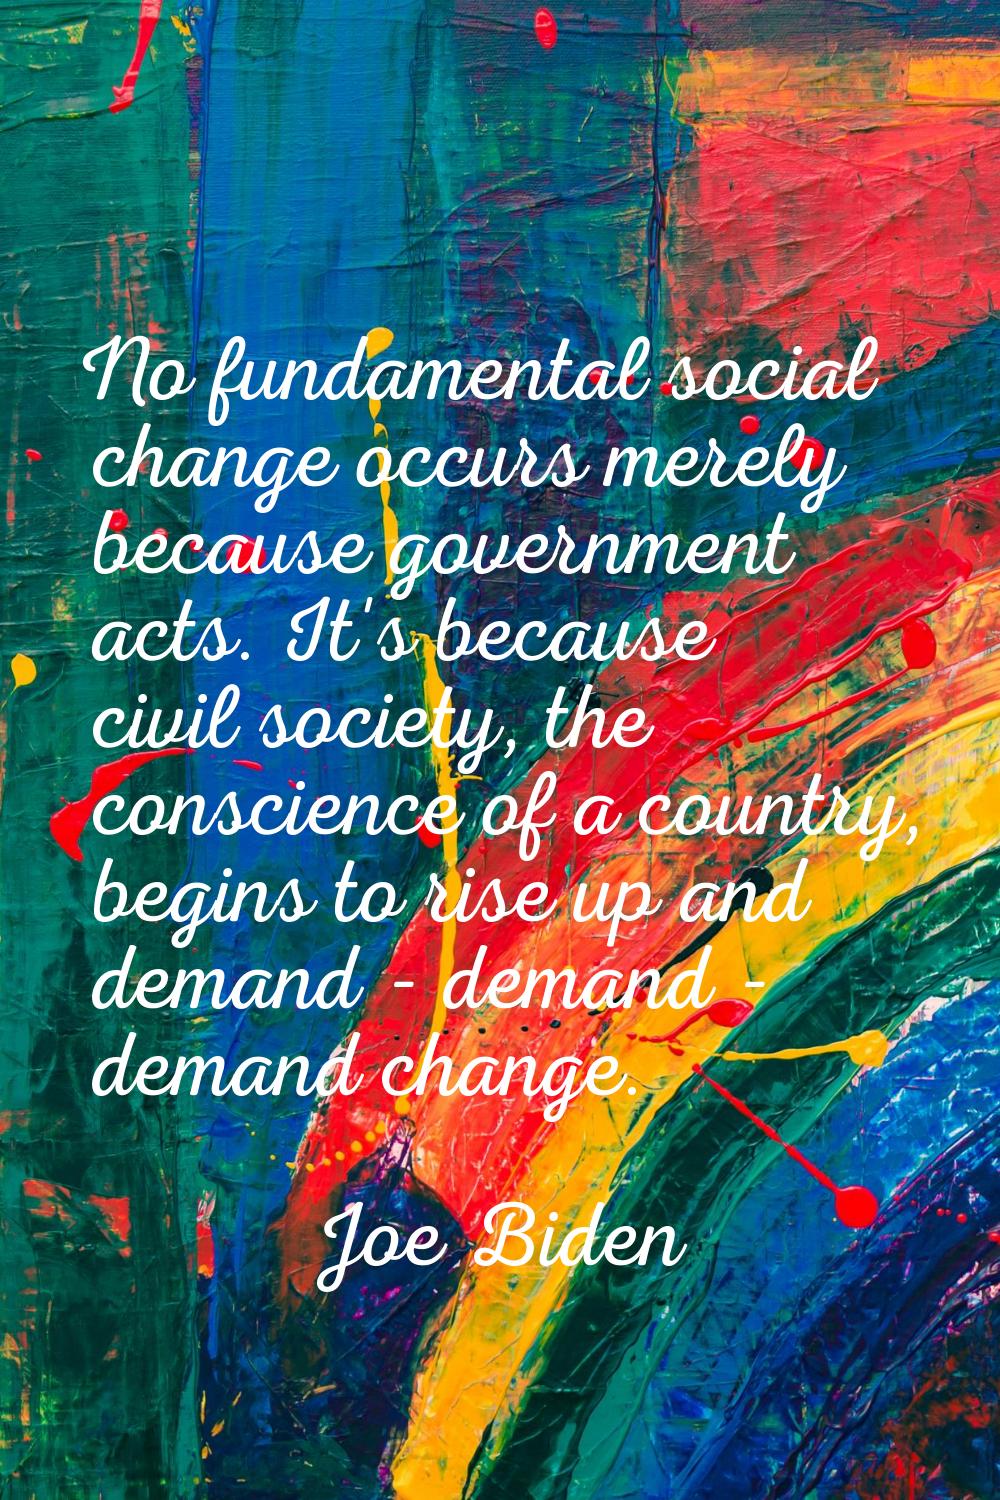 No fundamental social change occurs merely because government acts. It's because civil society, the